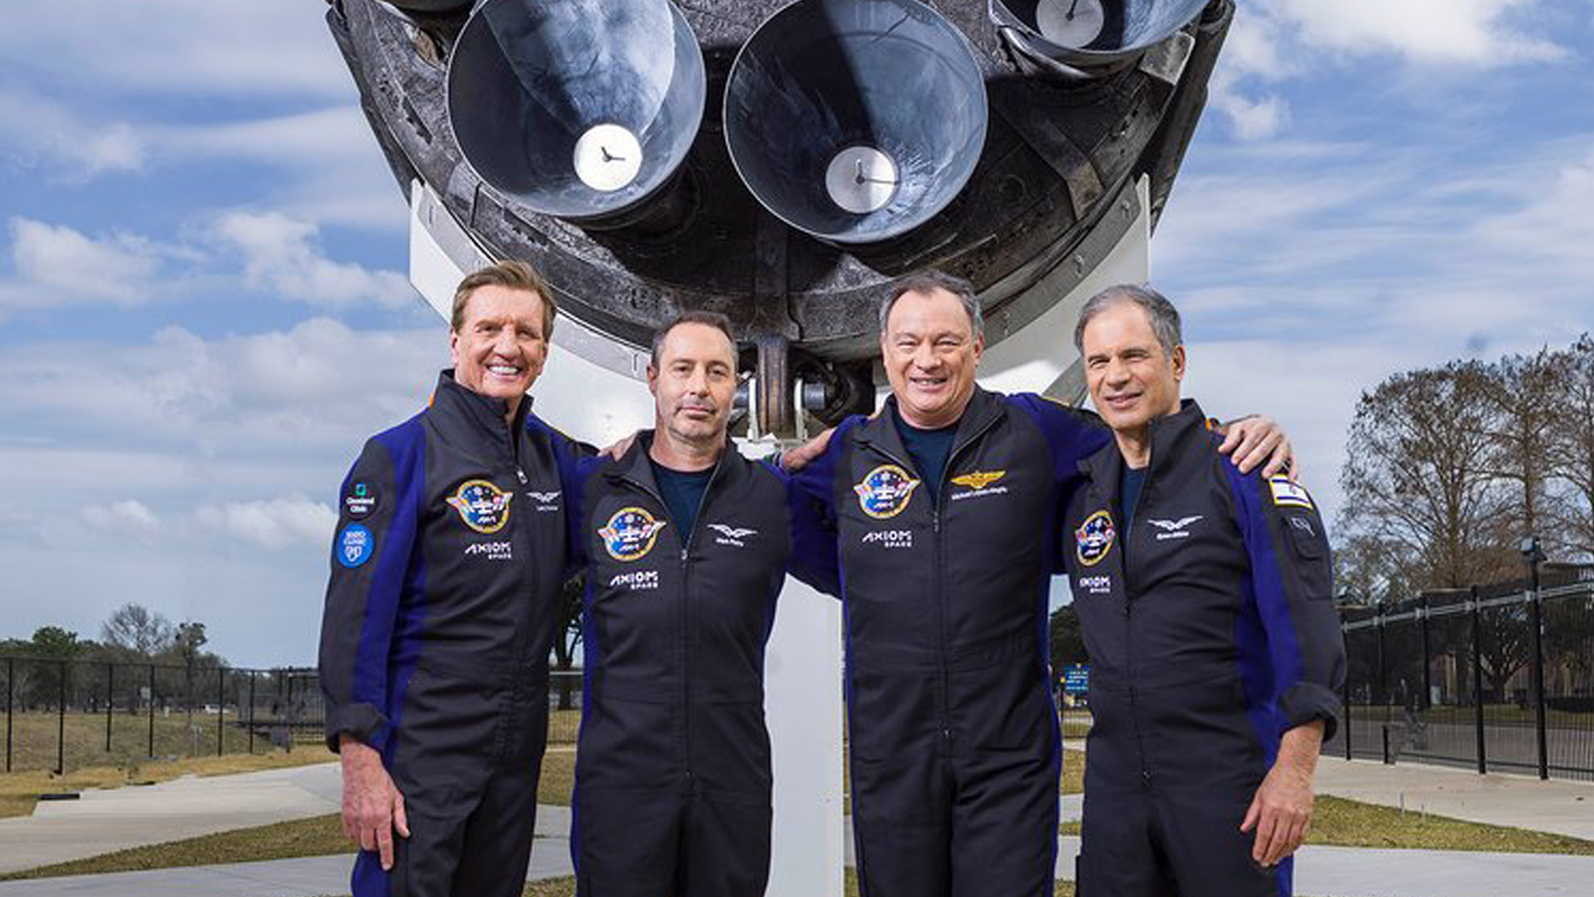 Axiom Space's private Ax-1 crew will ride a SpaceX spacecraft to the International Space Station in April 2022. They are (from left): pilot Larry Connor; Mark Pathy, mission specialist; López-Alegría , commander; and Eytan Stibbe, mission specialist.